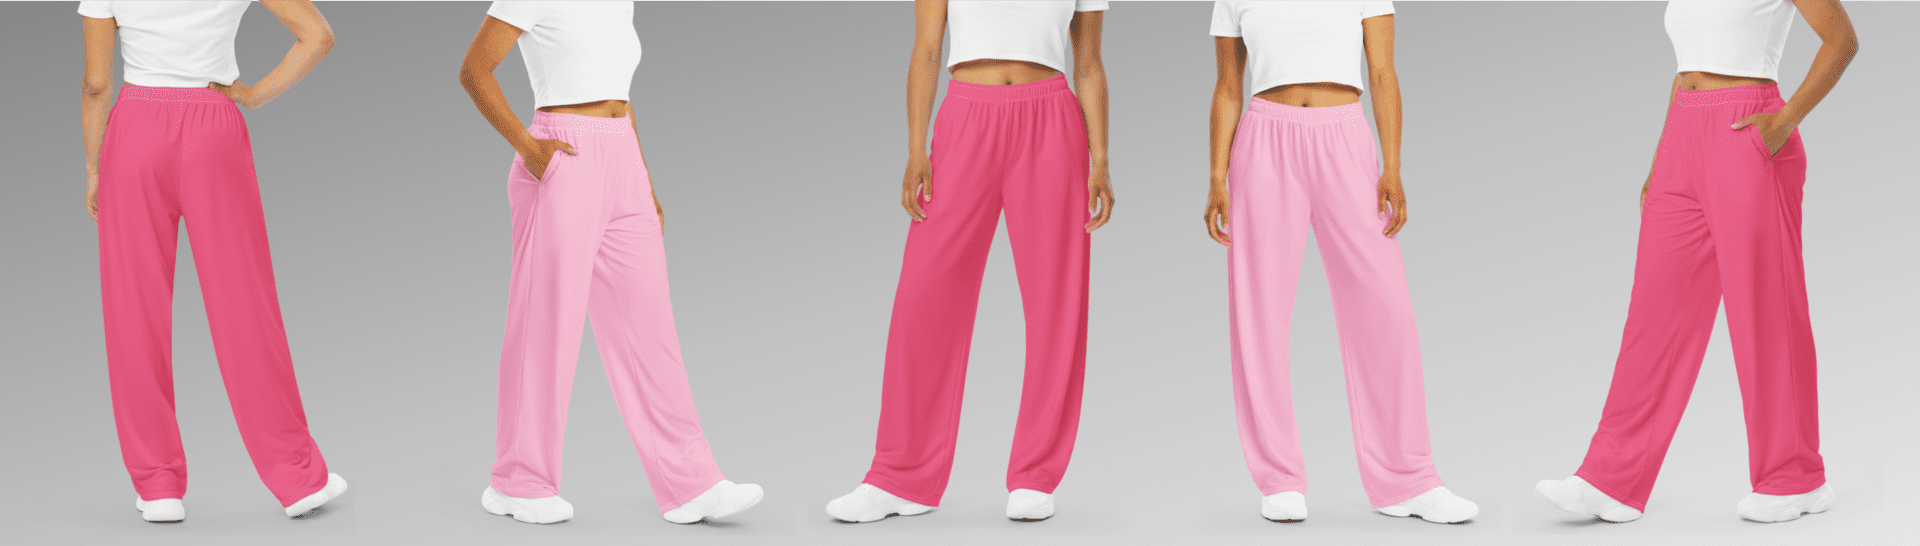 Women in pink pants and white tops.